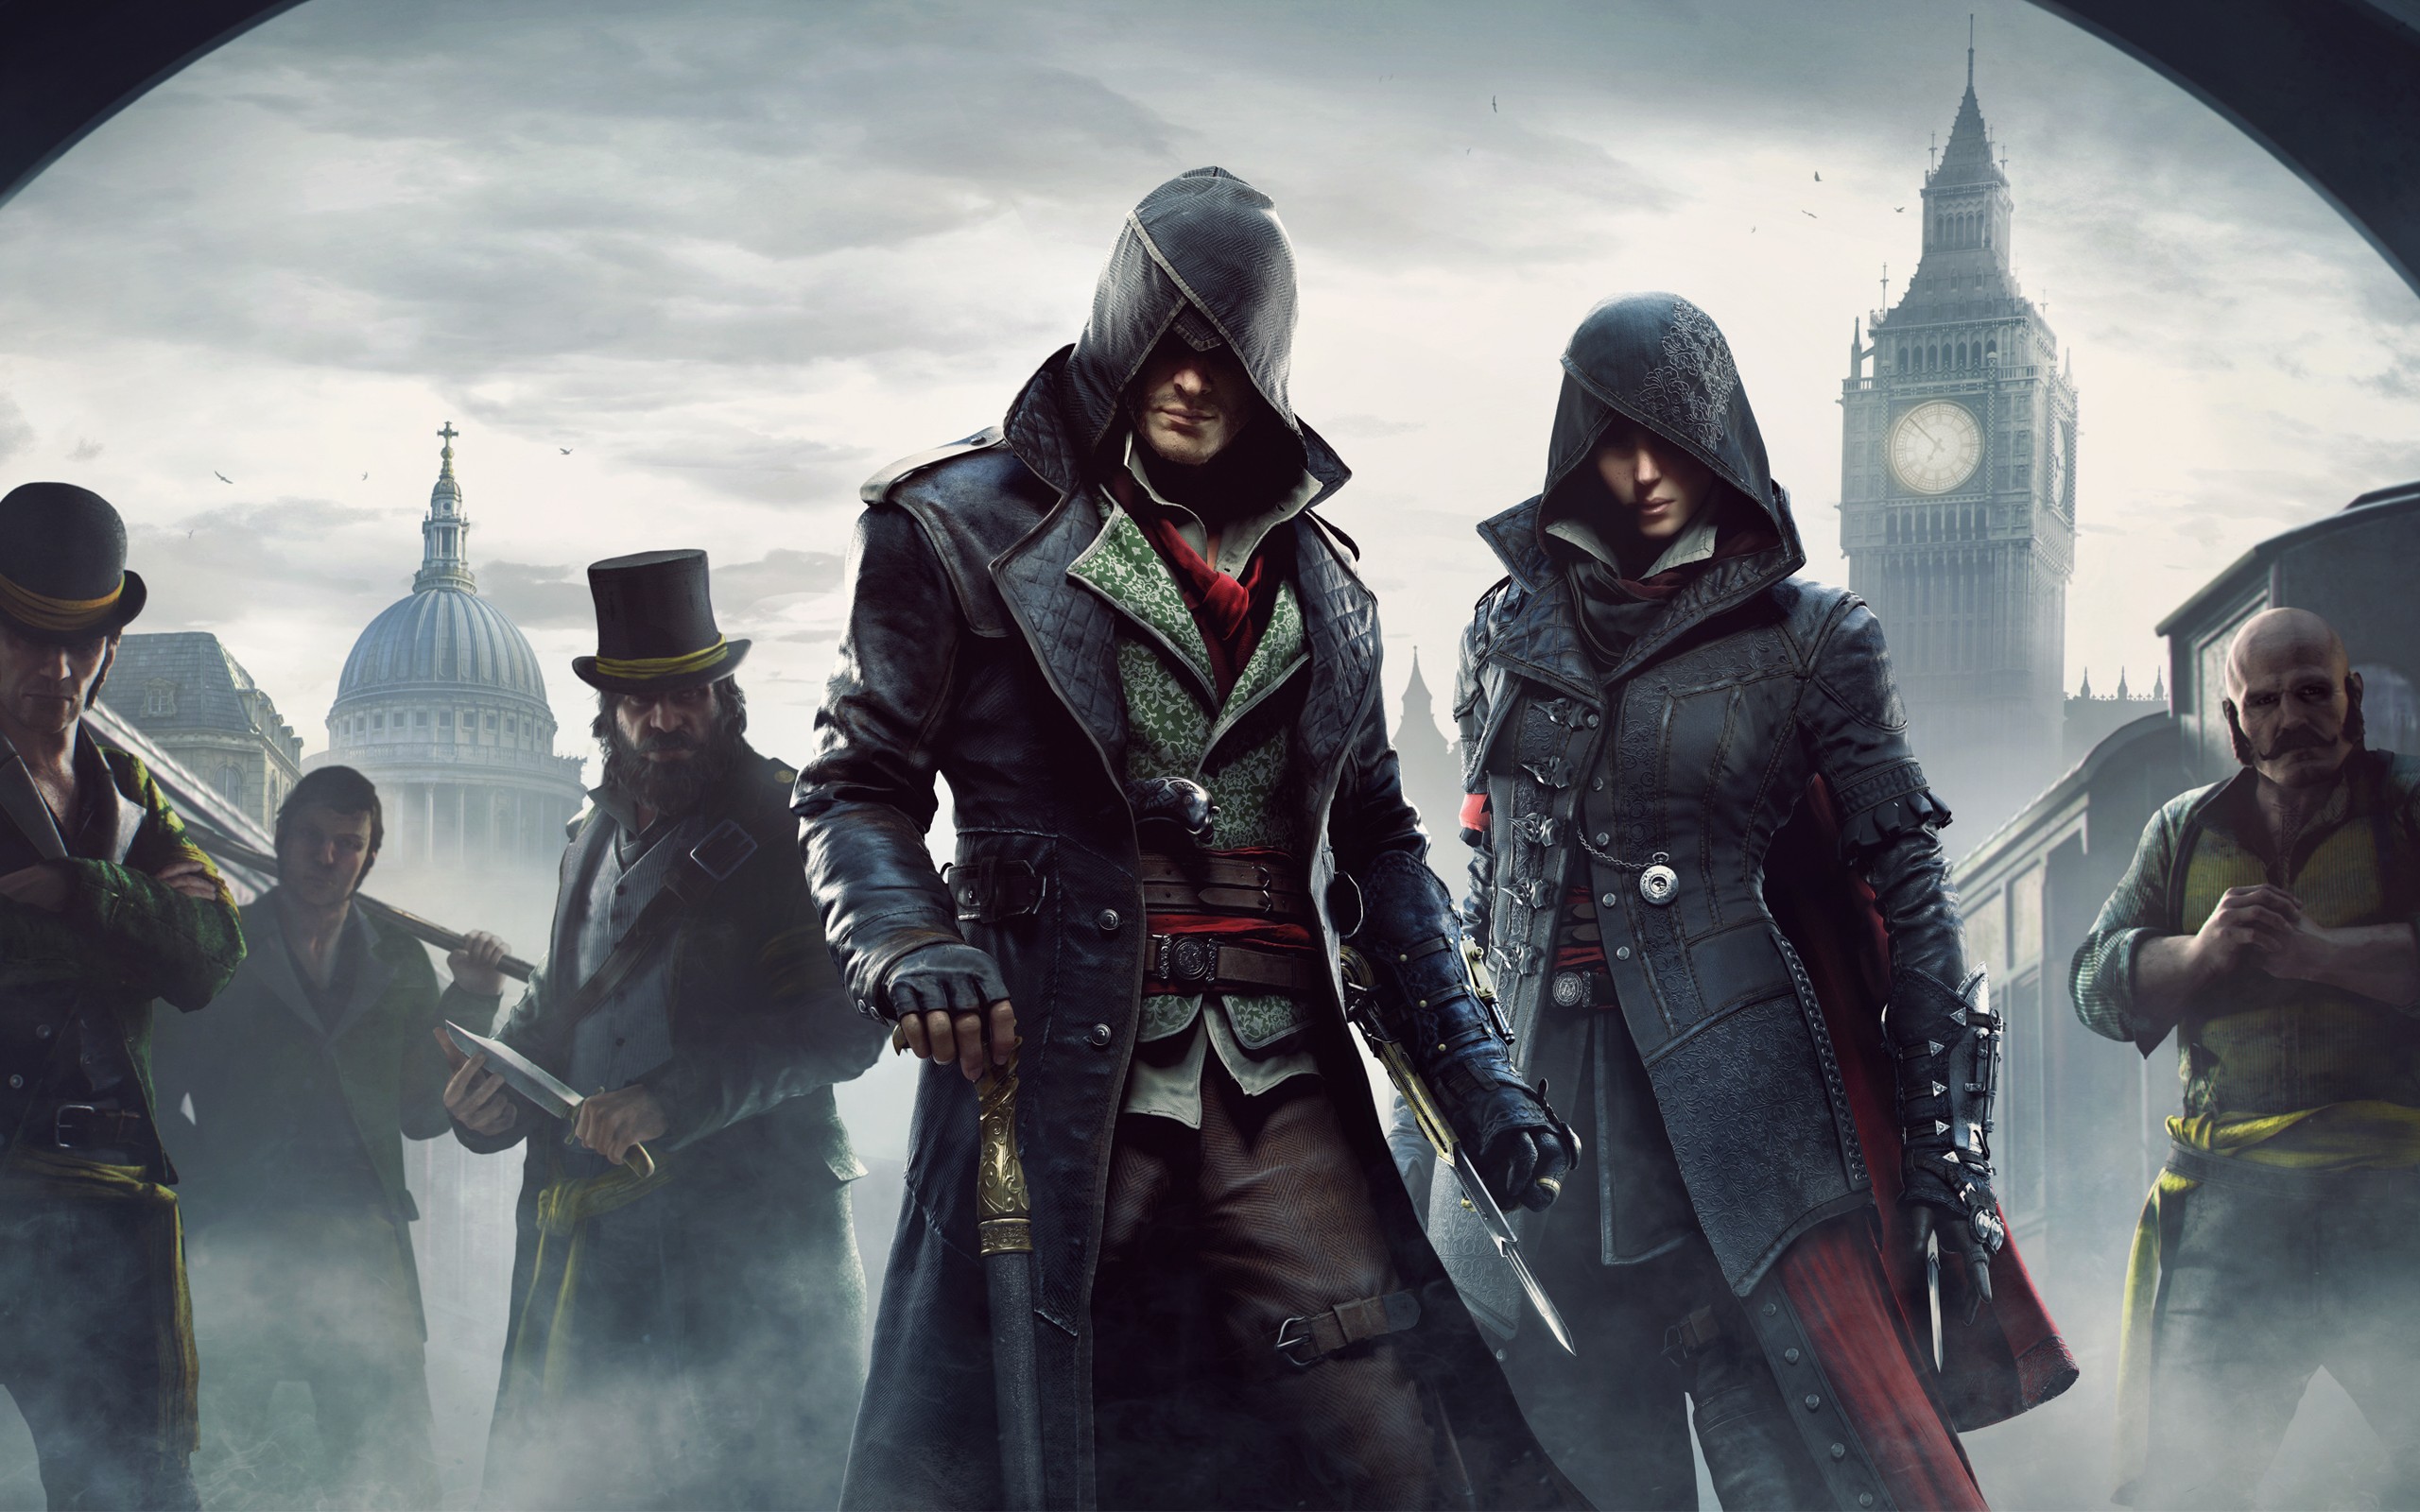 General 2560x1600 Assassin's Creed video games Big Ben Assassin's Creed Syndicate Evie Frye Jacob Frye video game characters Ubisoft